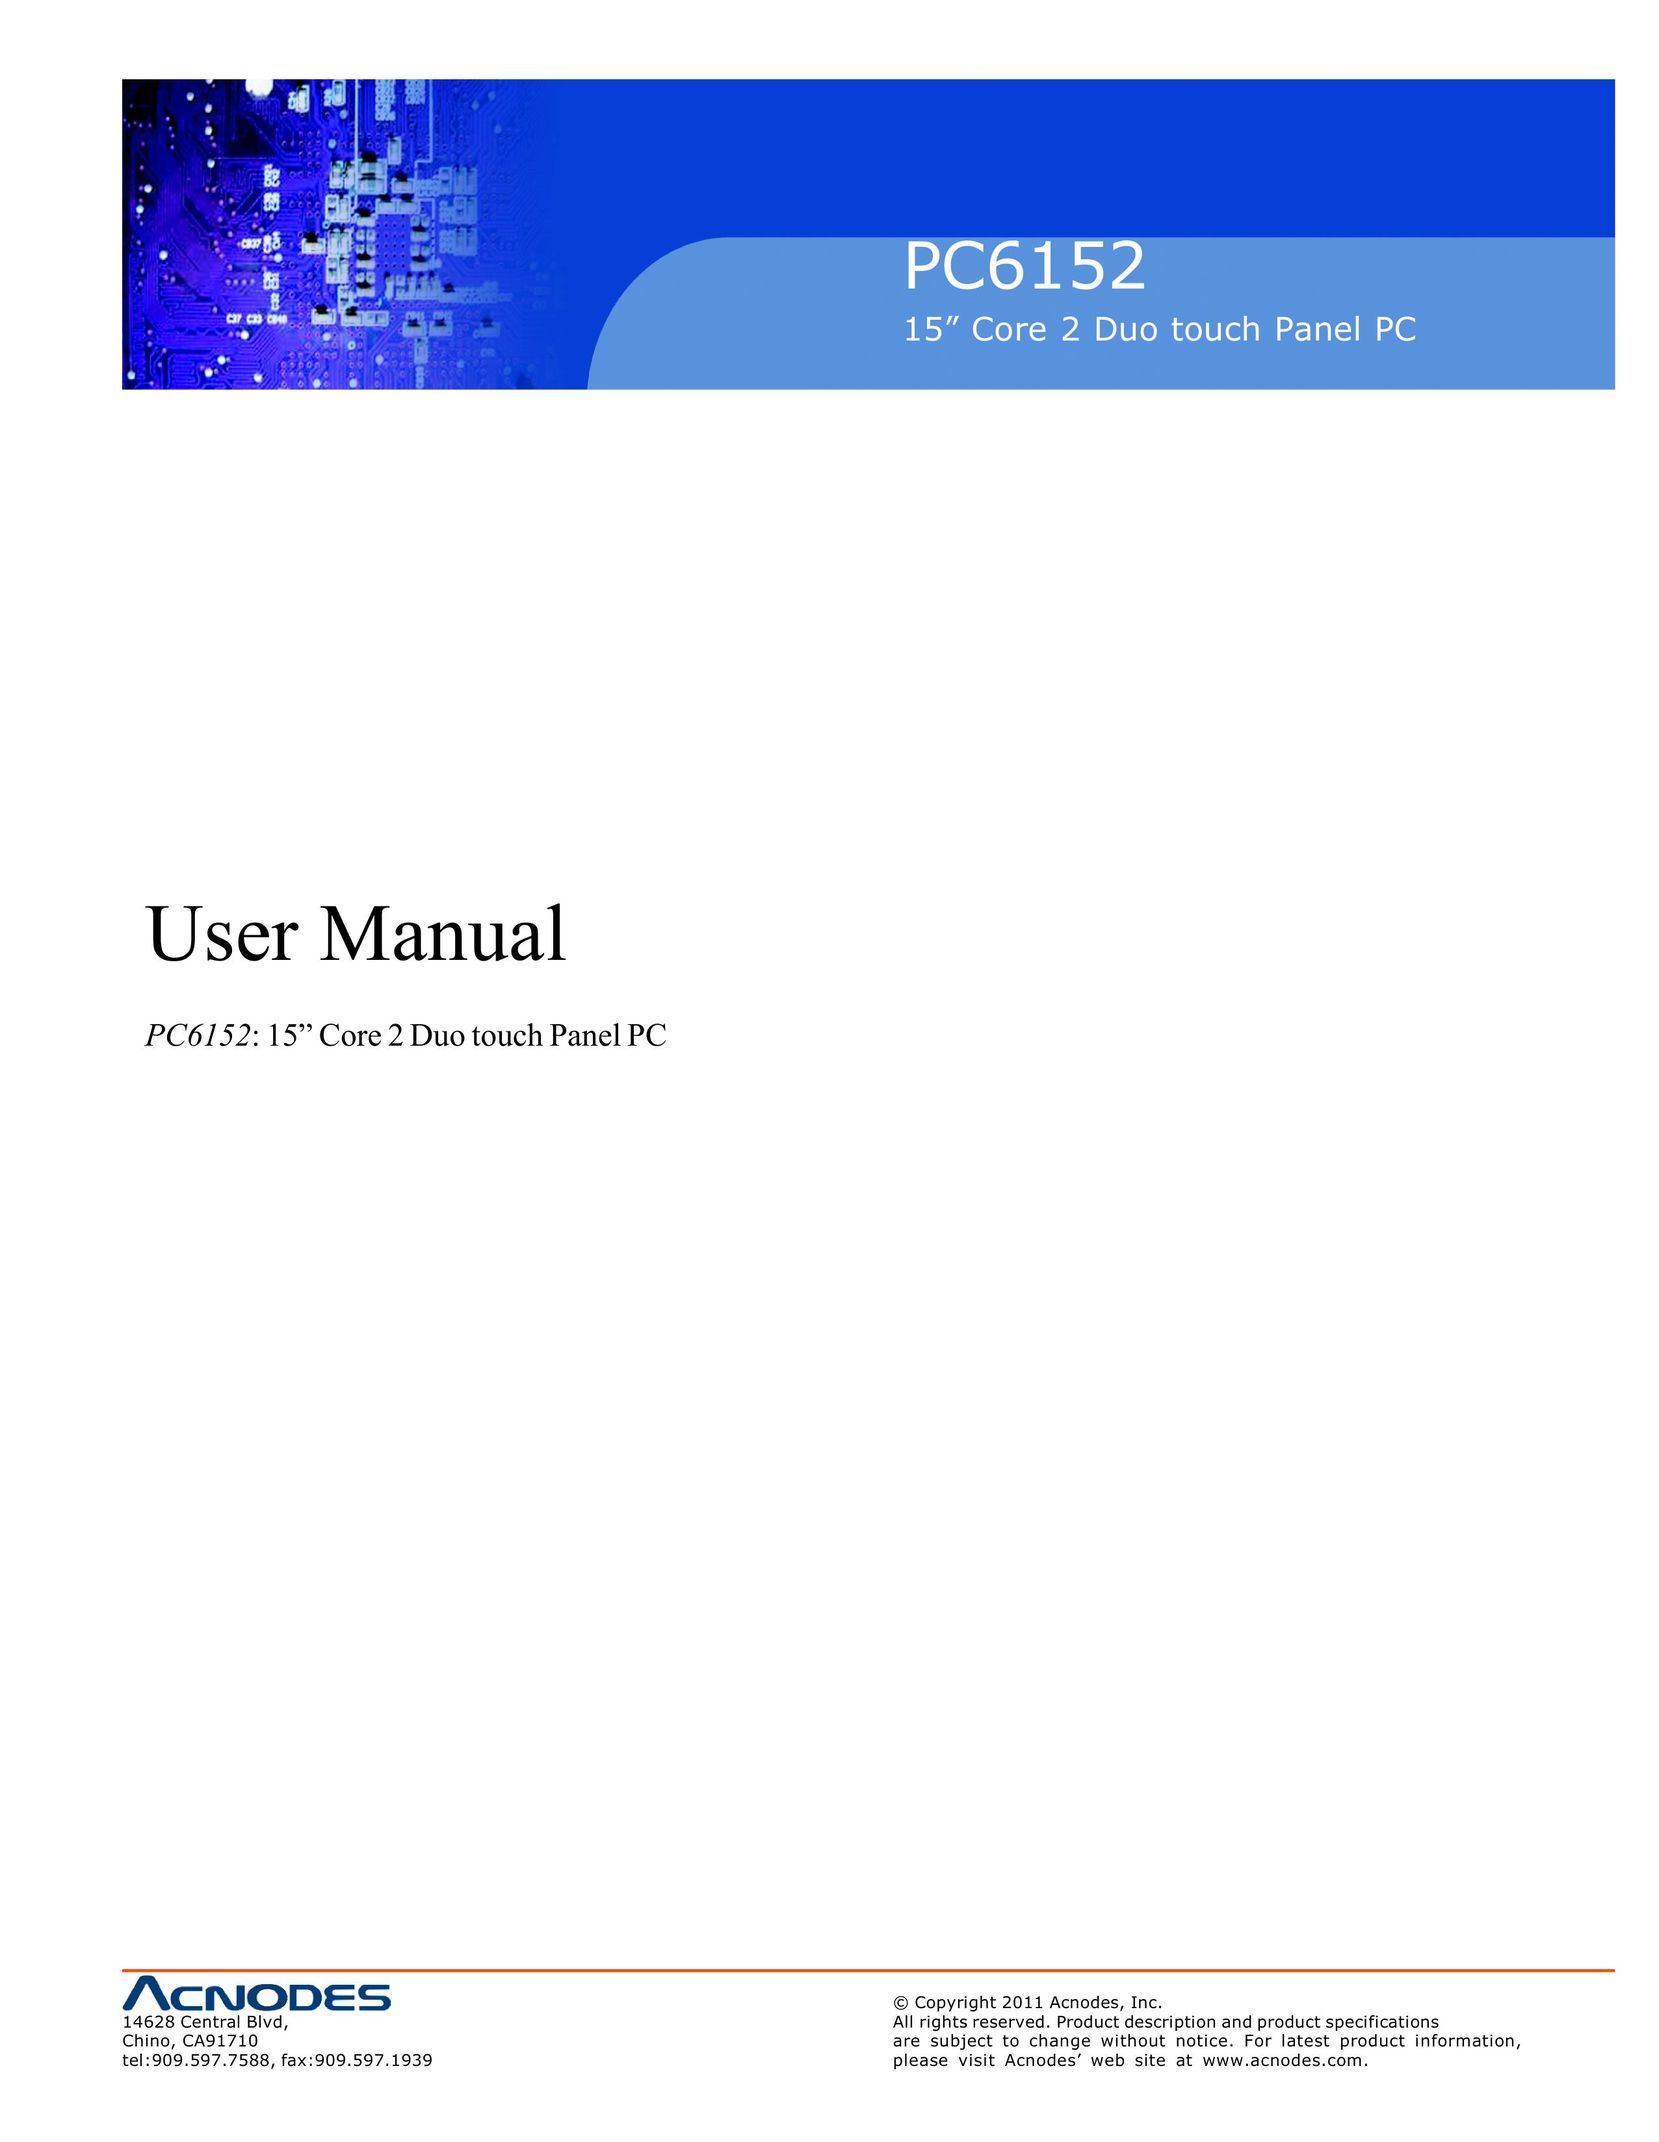 Acnodes PC6152 Personal Computer User Manual